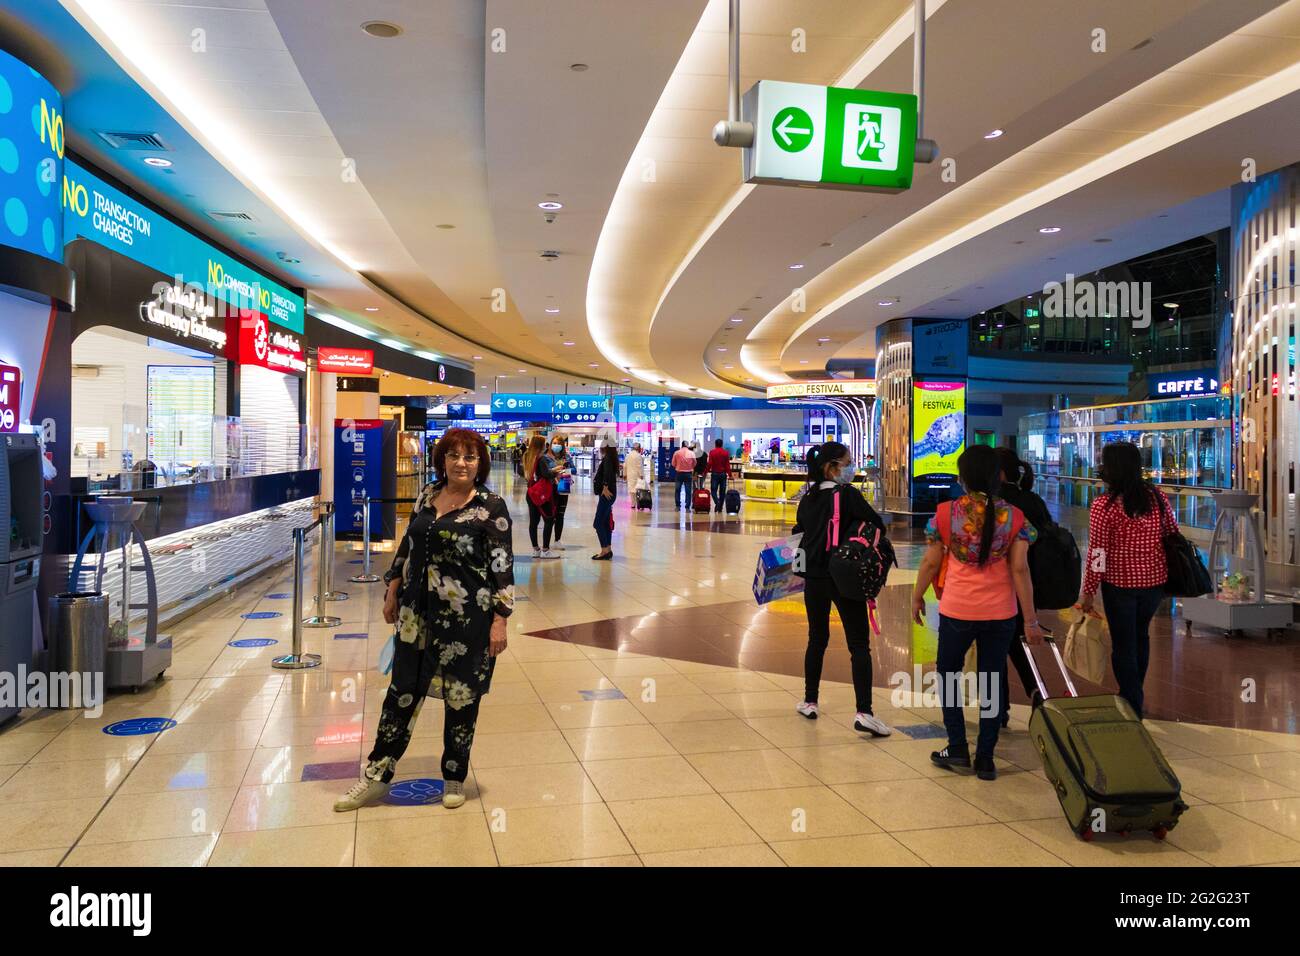 View of Dubai International Airport Terminal 2.Dubai is a city and emirate in the United Arab Emirates Stock Photo